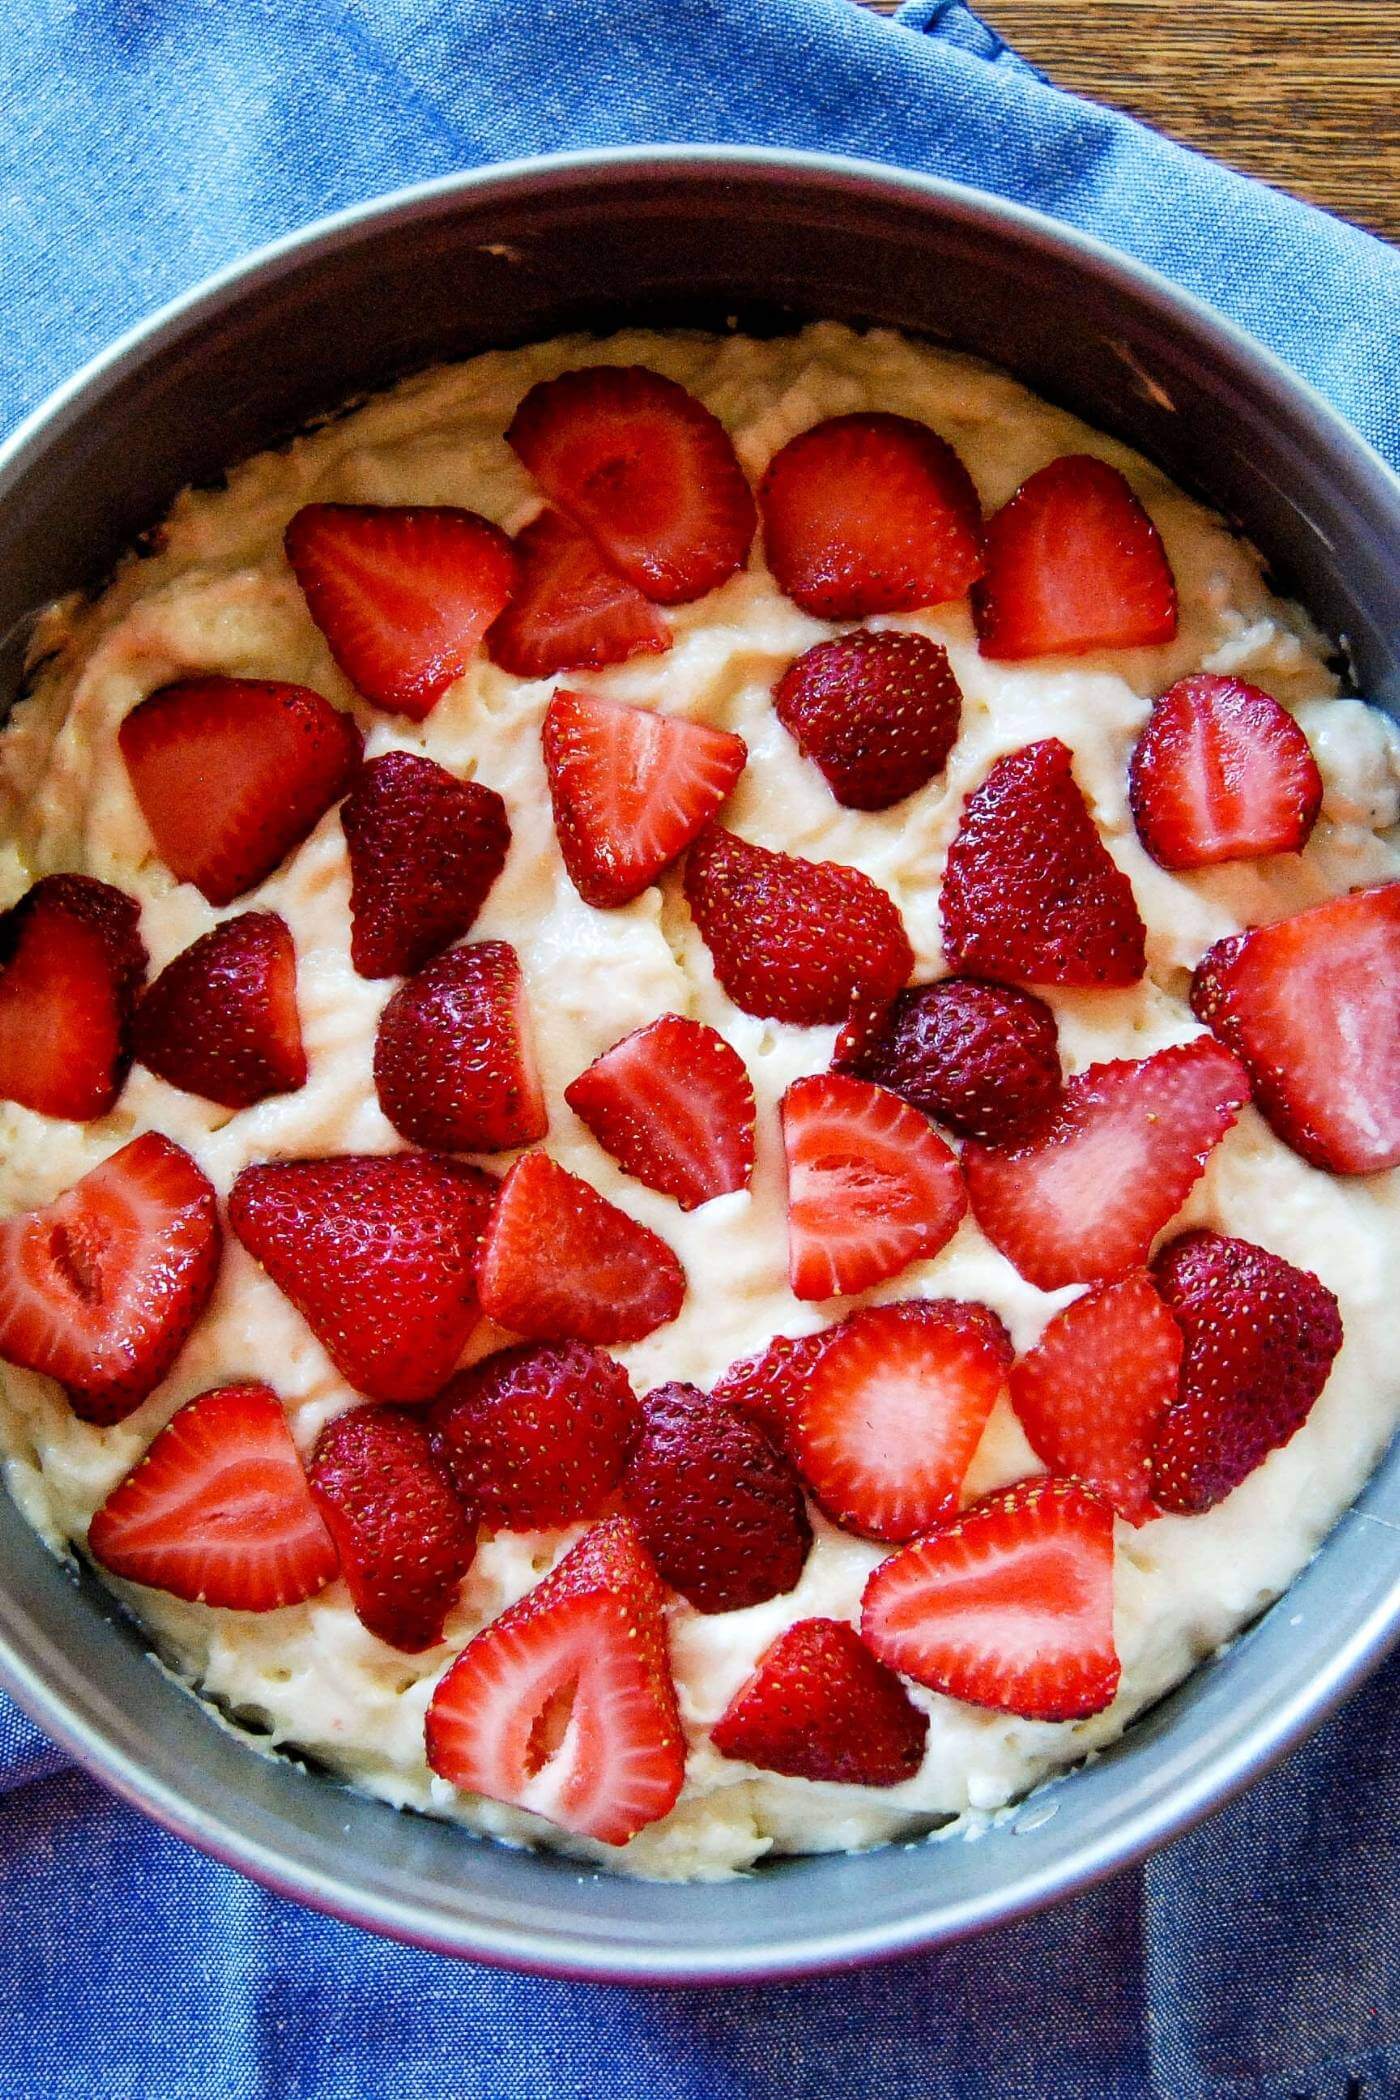 lemon and strawberry cake - pre-baked in pan.